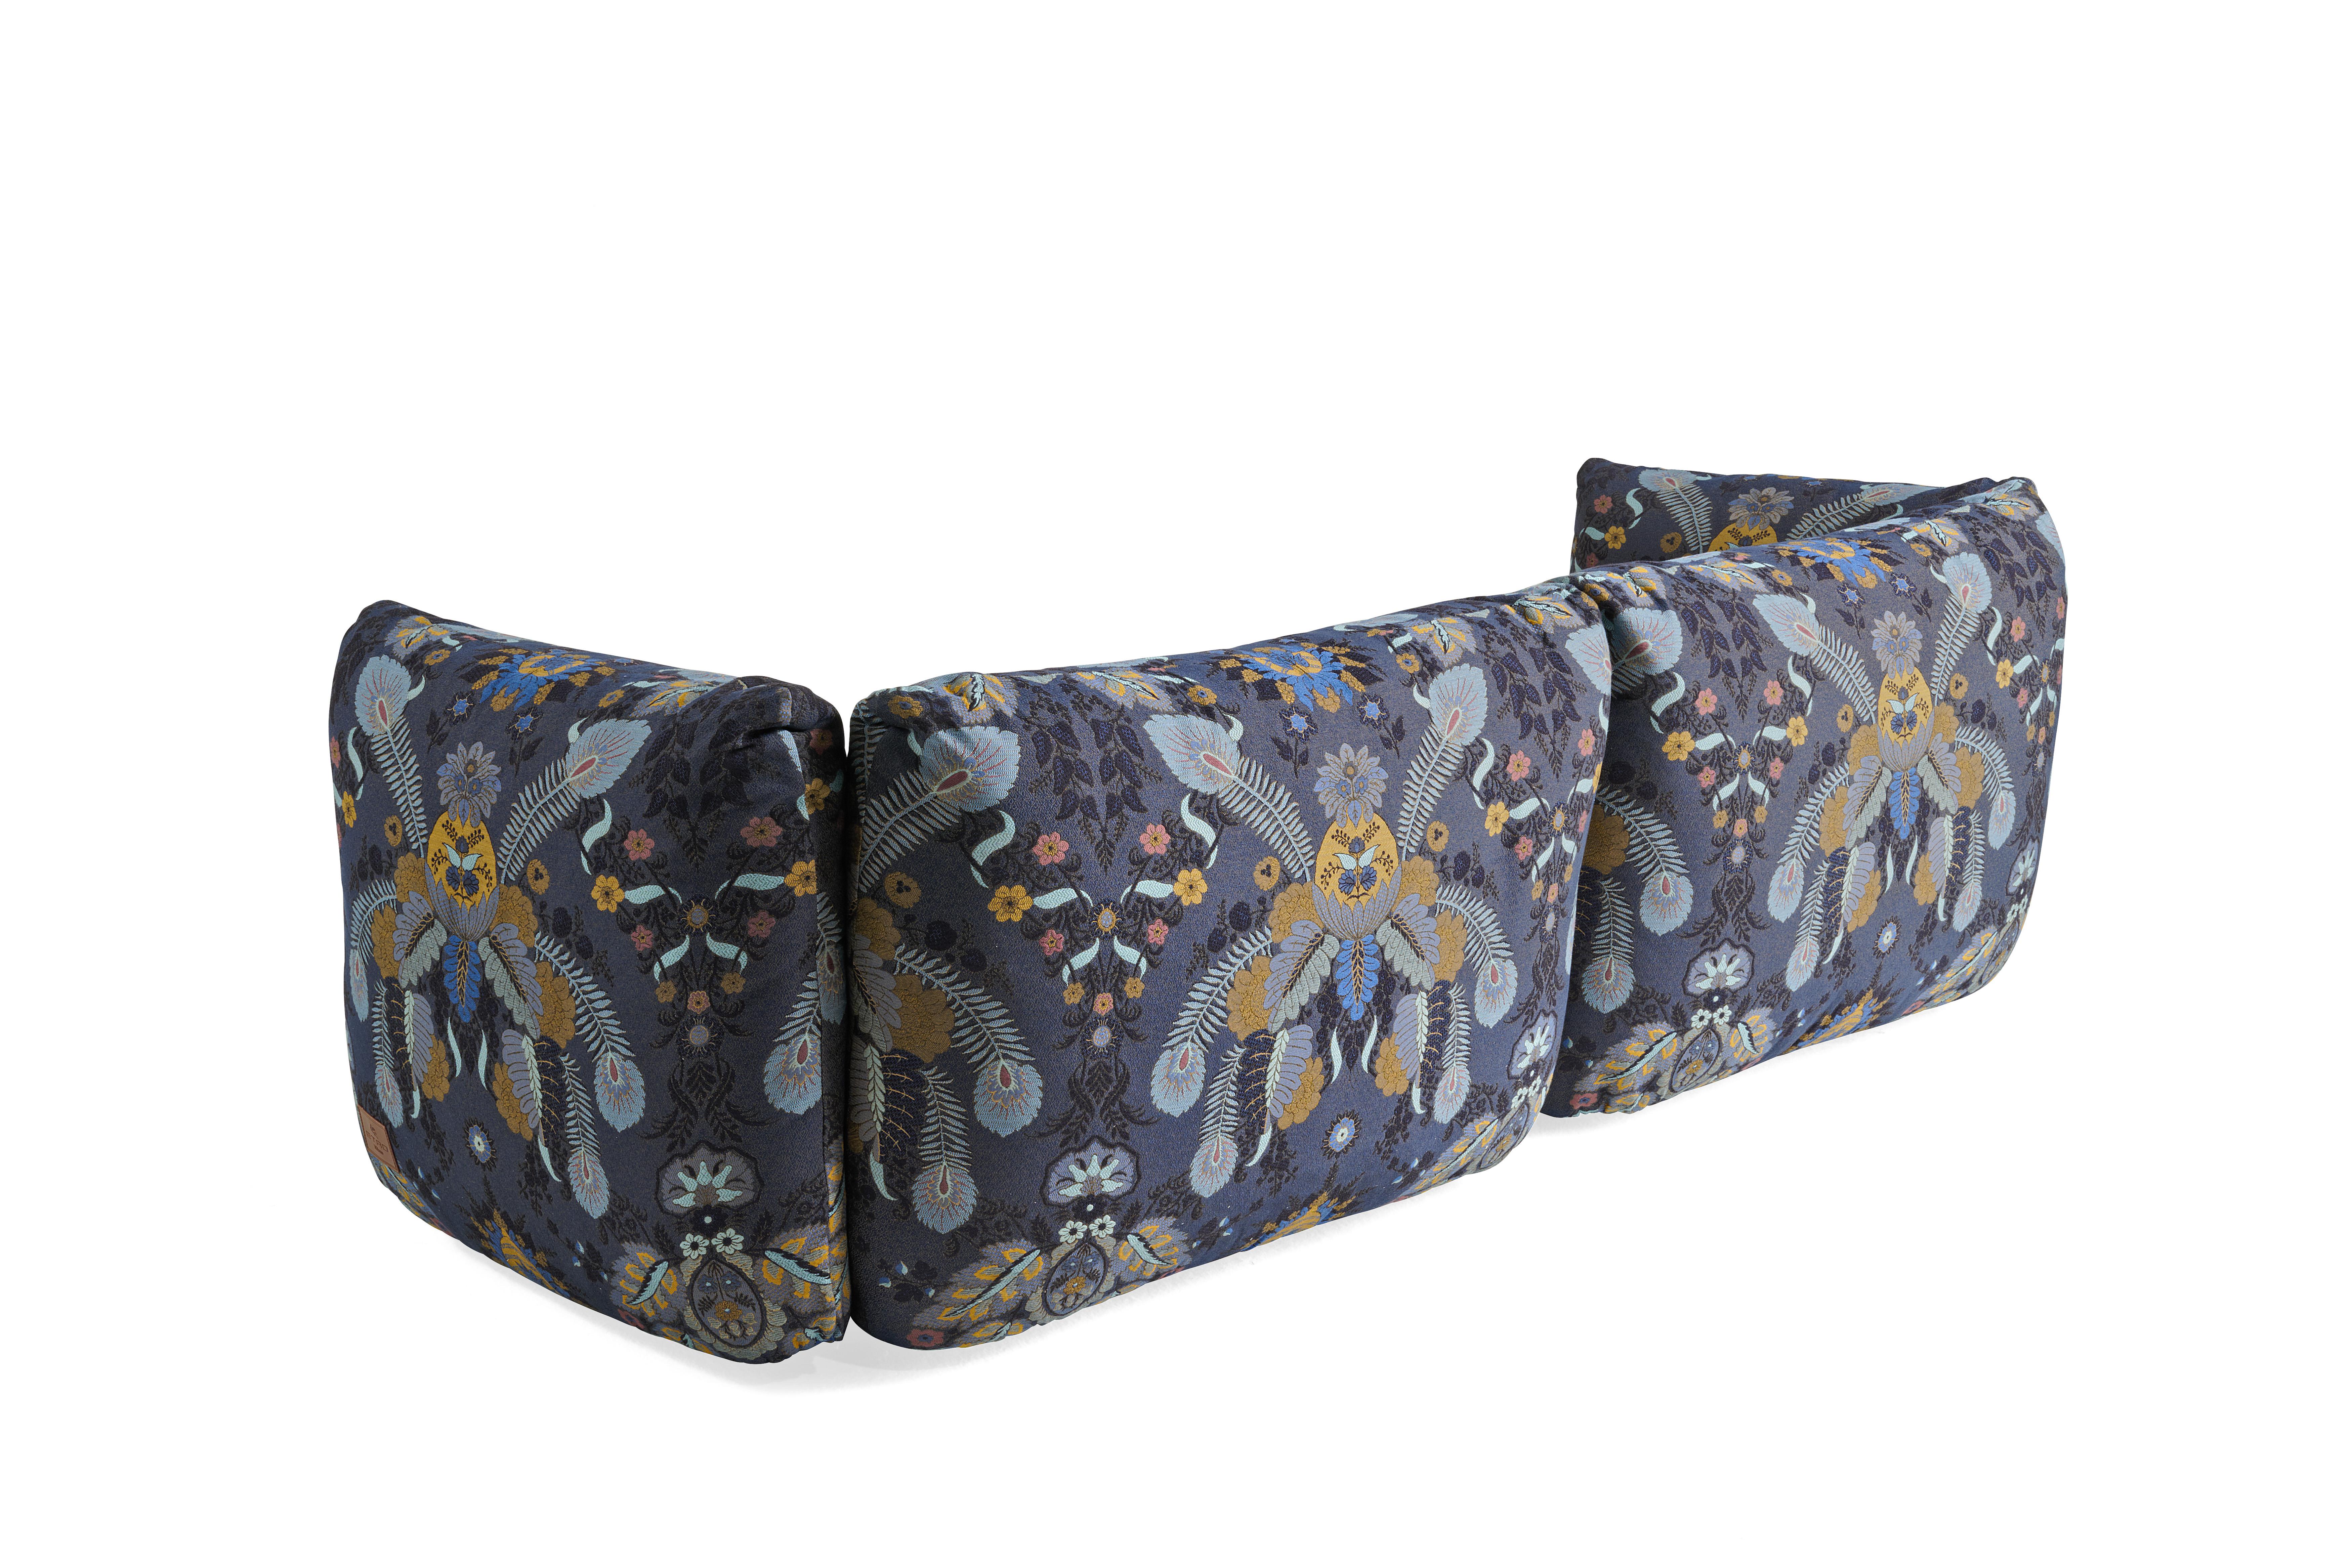 Modern 21st Century Cushy Sofa in Blue Jacquard Fabric by Etro Home Interiors For Sale